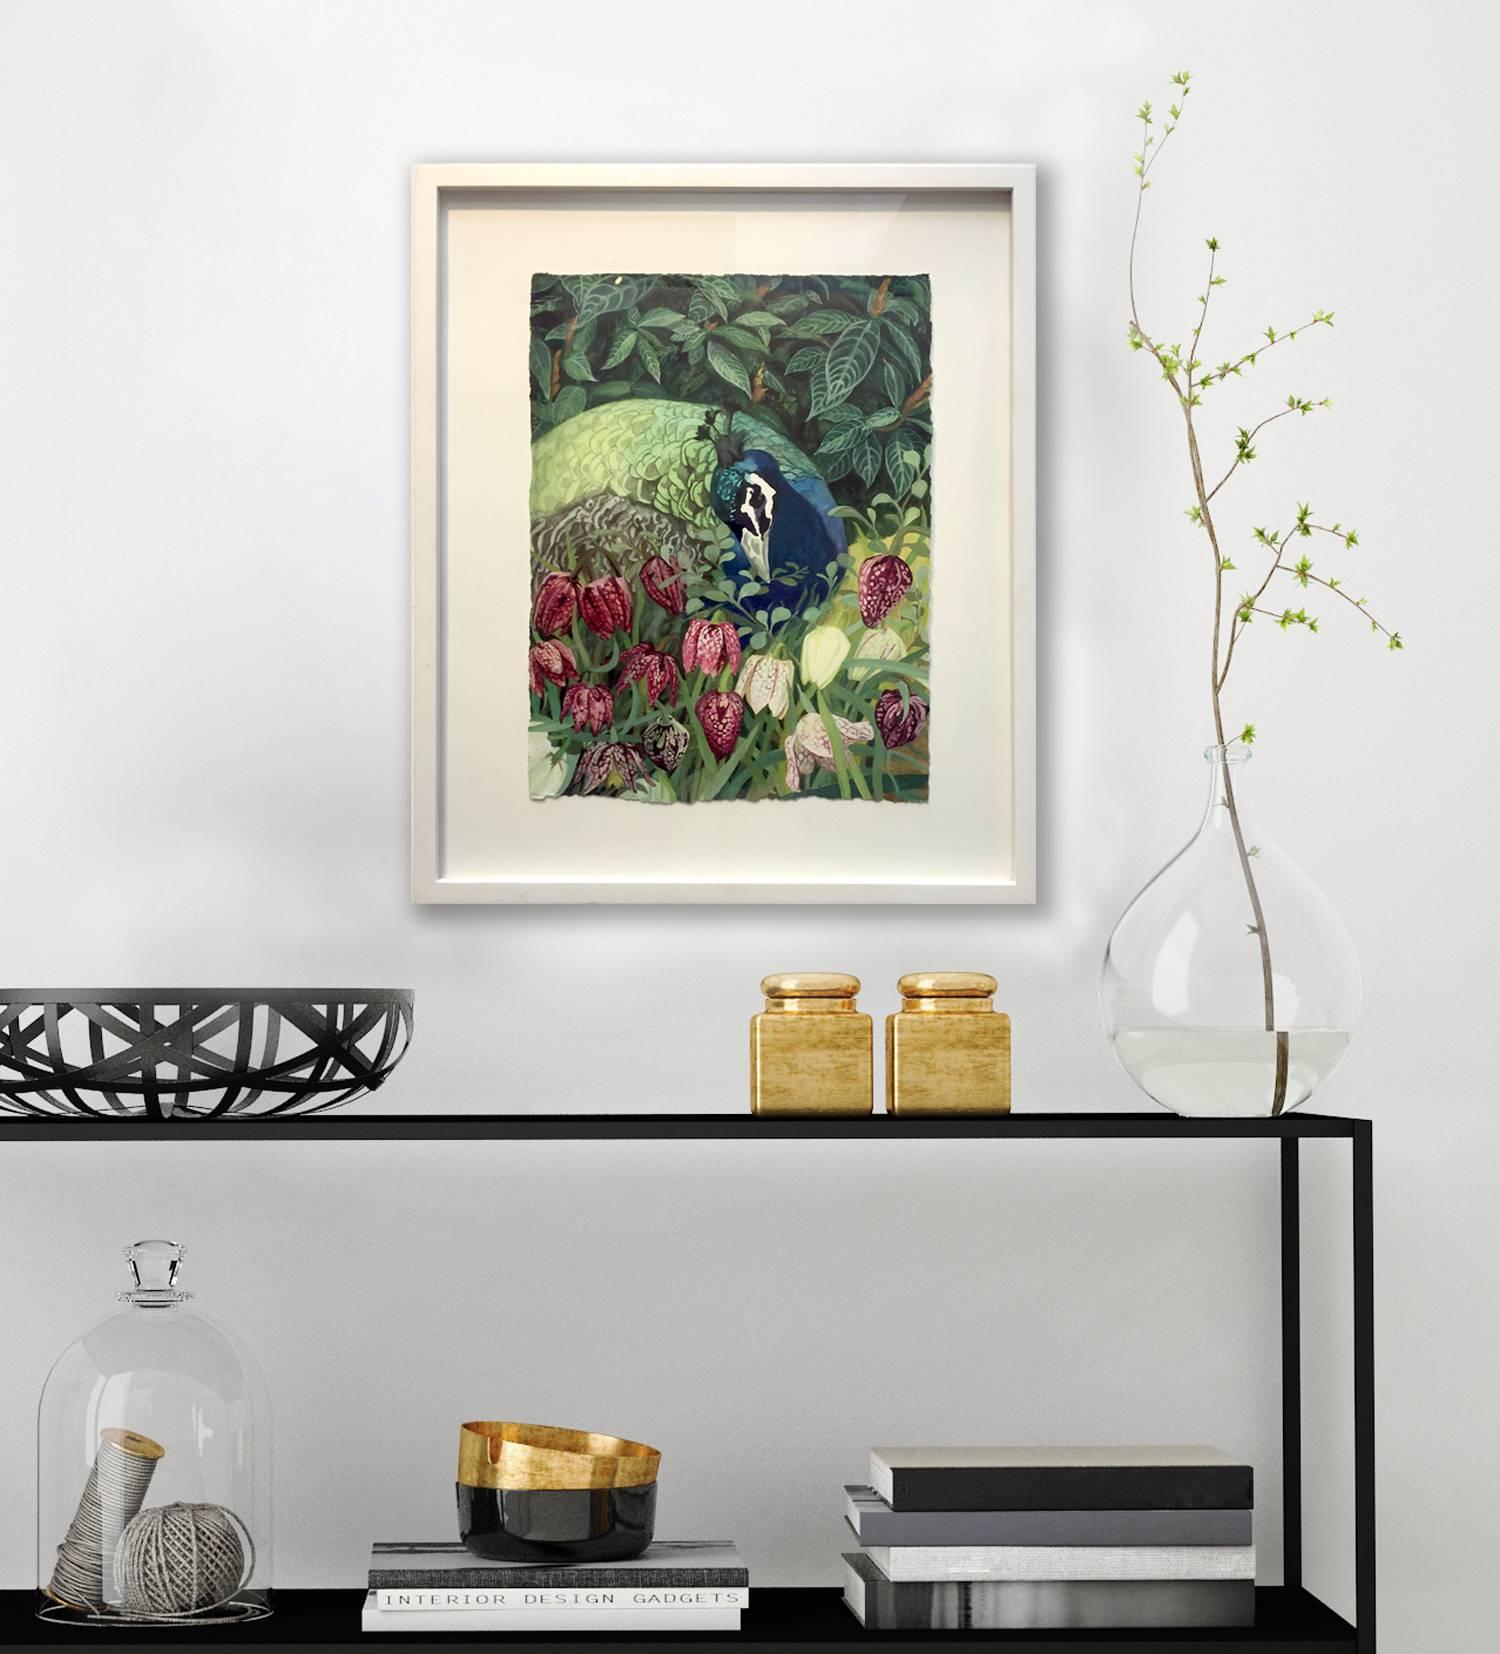 Floral, plant, nature art, nature paintings, ornithology art, bird, peacock, blue, flowers, pink, tropical, botanical art

ARTIST STATEMENT
The imagery in my paintings is derived from what is surprising and dazzling in the natural world. The focus